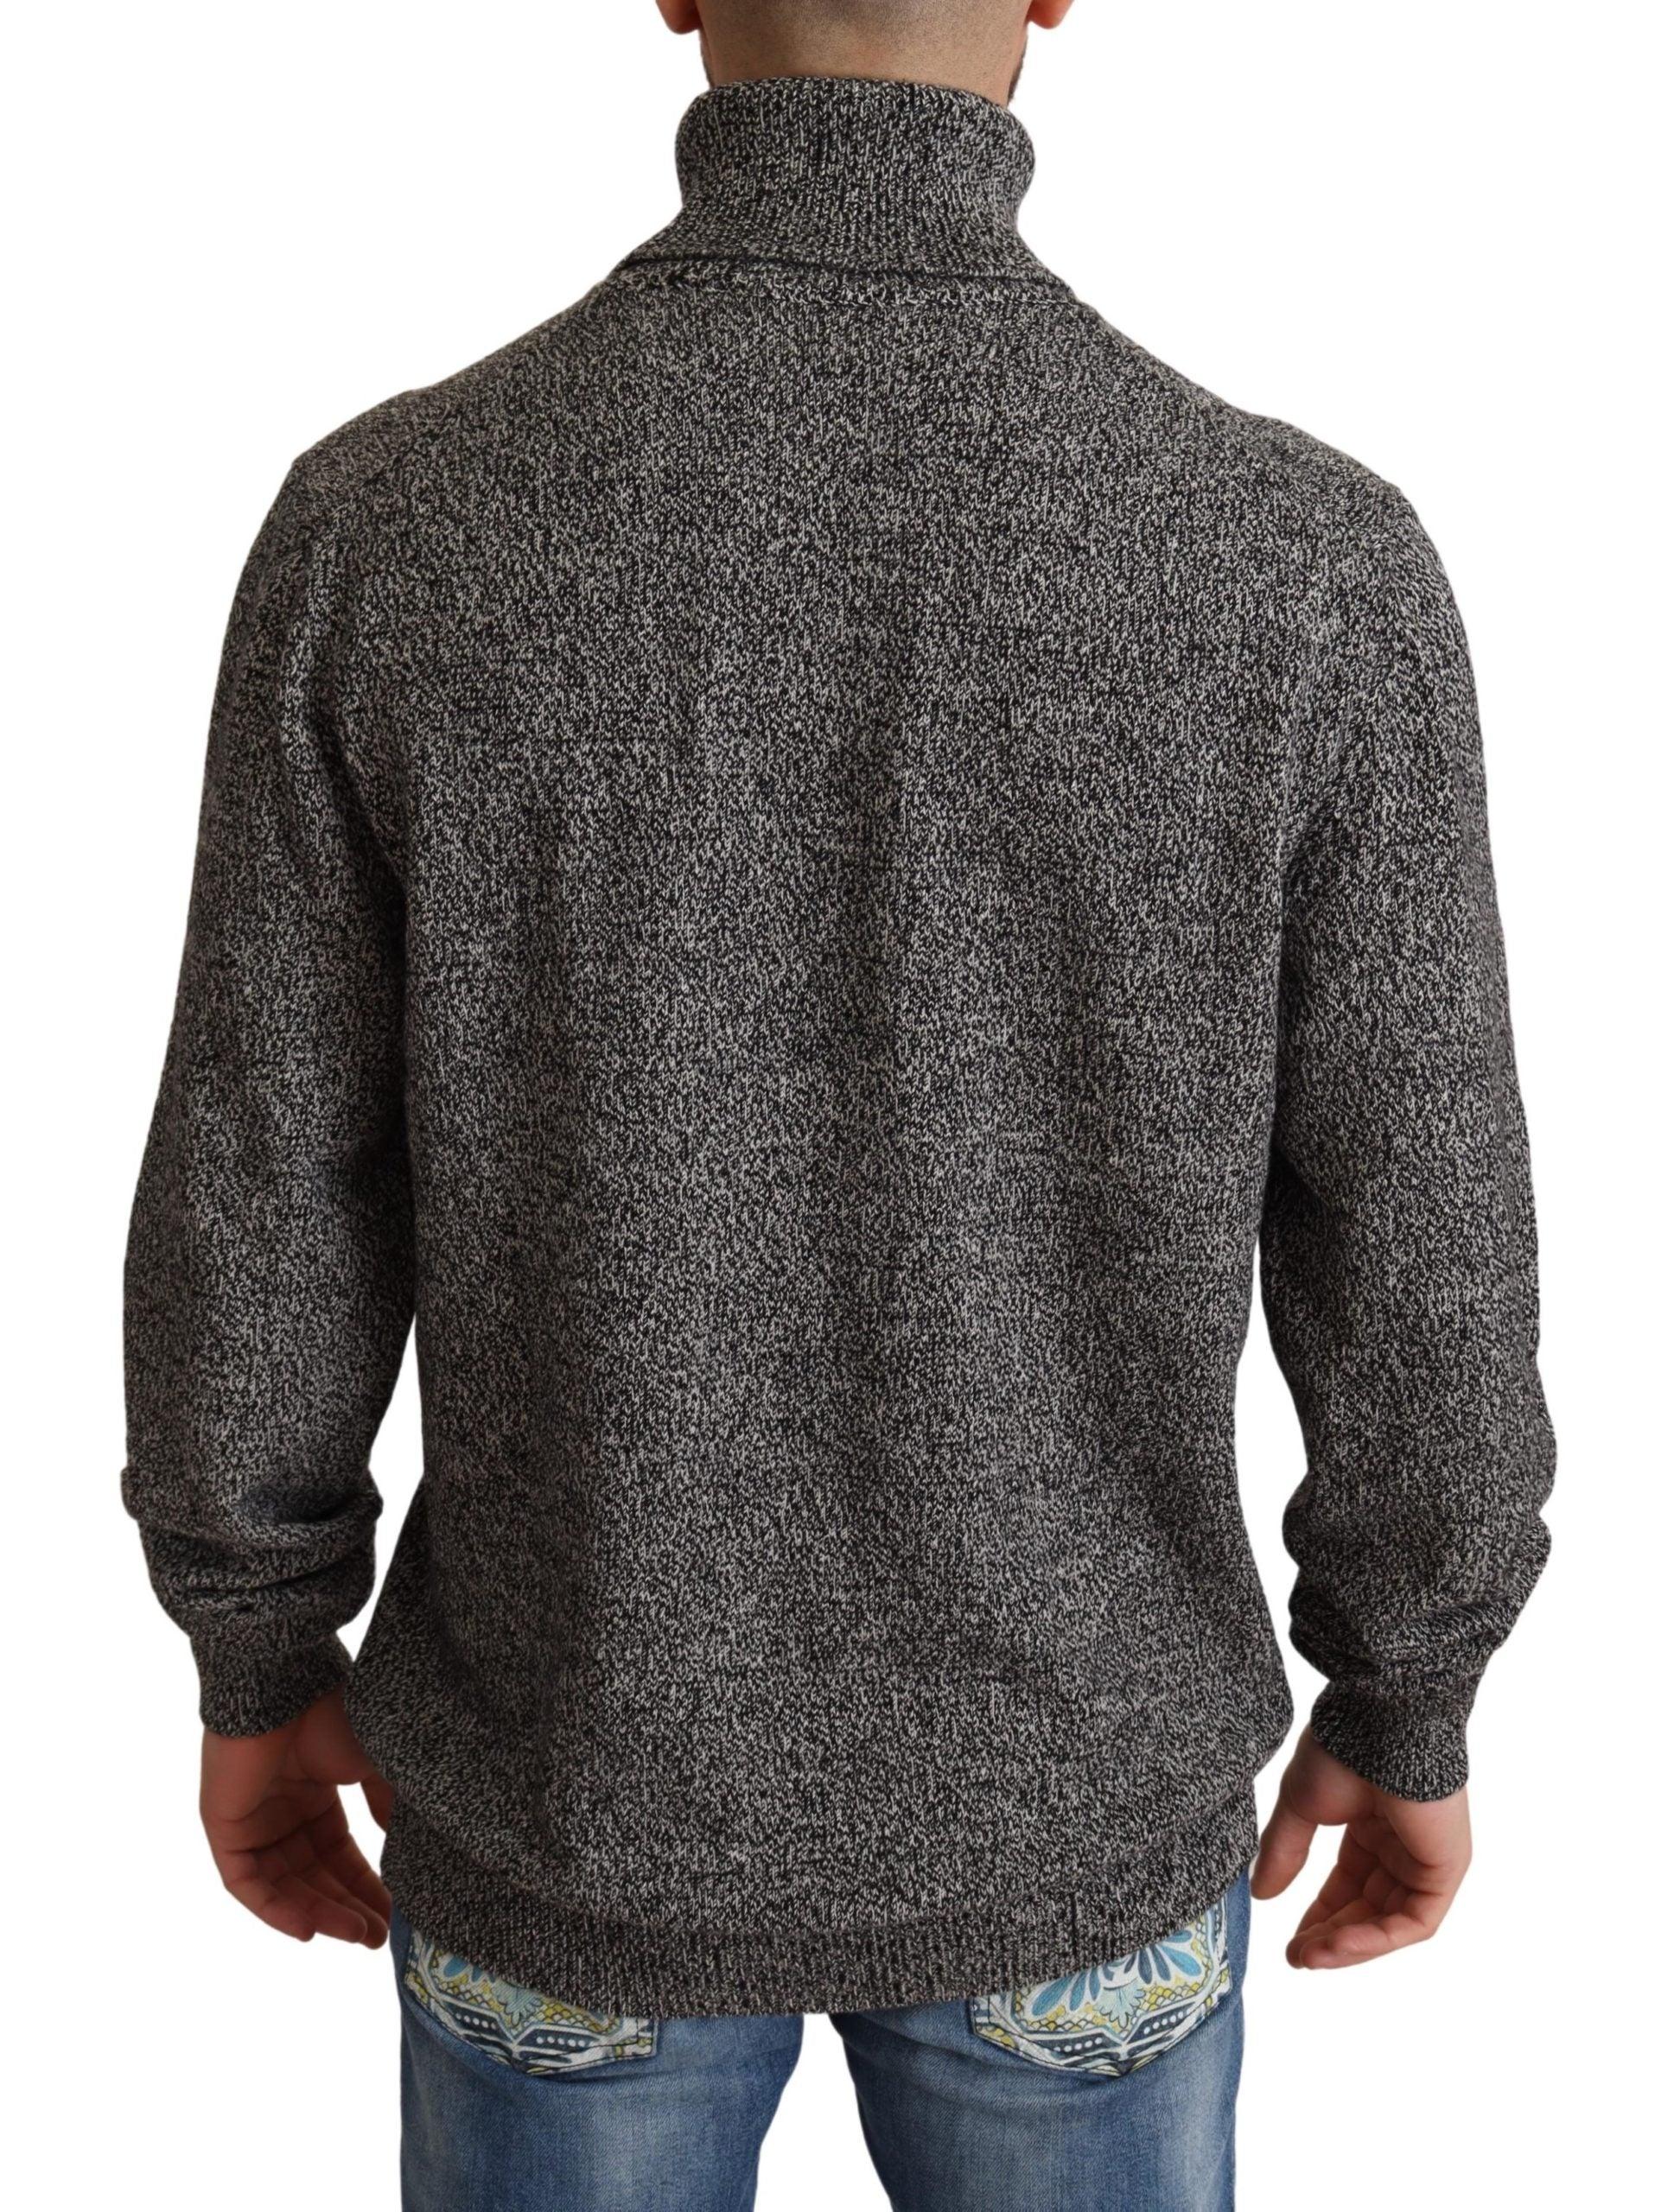 Save 17% Dolce & Gabbana Turtle Neck Cashmere Pullover Sweater in Grey for Men Mens Sweaters and knitwear Dolce & Gabbana Sweaters and knitwear 